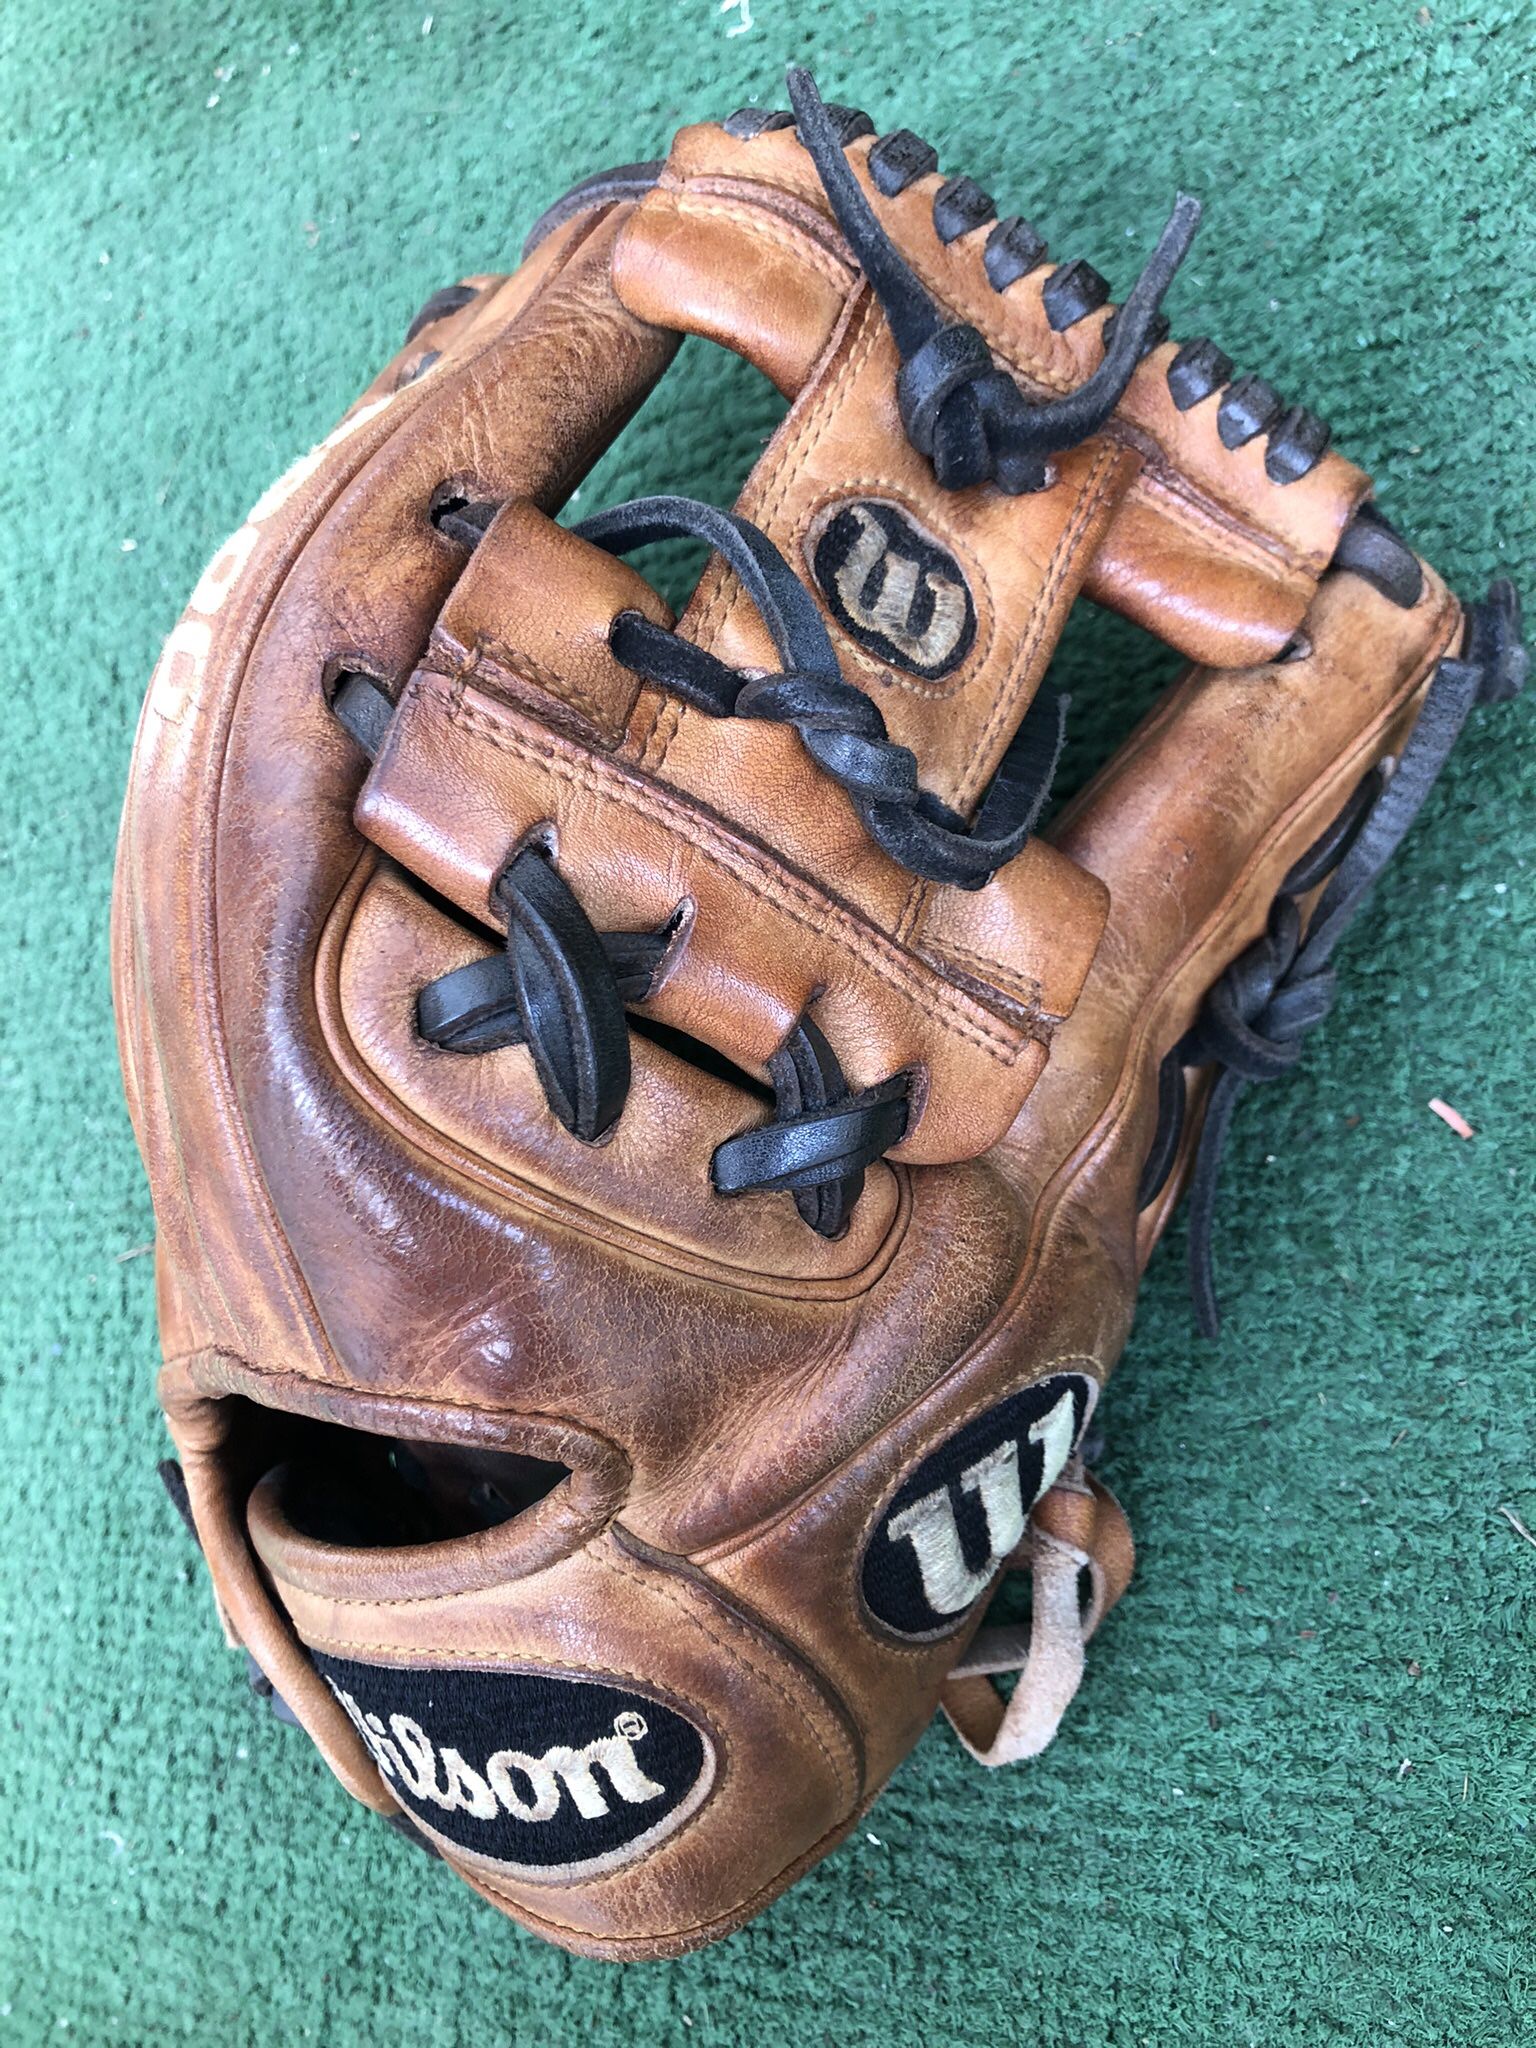 Wilson A2000 Baseball Glove Sz 11.5” In Good Condition Have More Equipment $120 firm